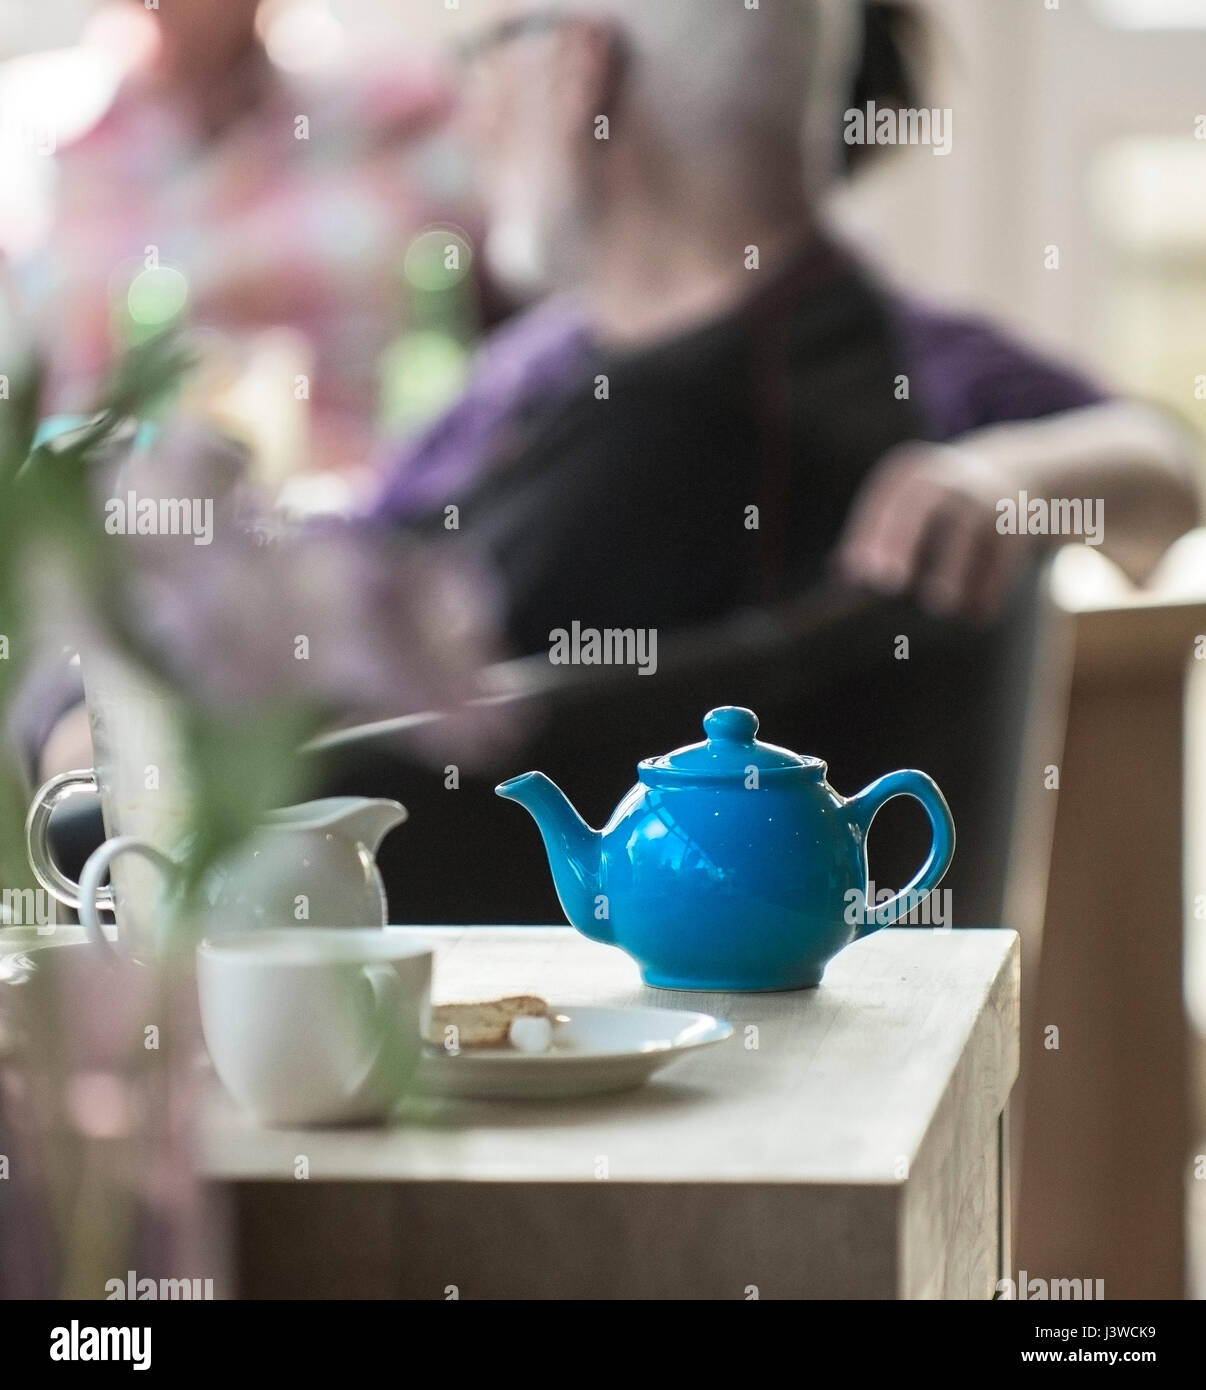 A blue teapot on a table restaurant Cafe Cafeteria Afternoon tea Stock Photo